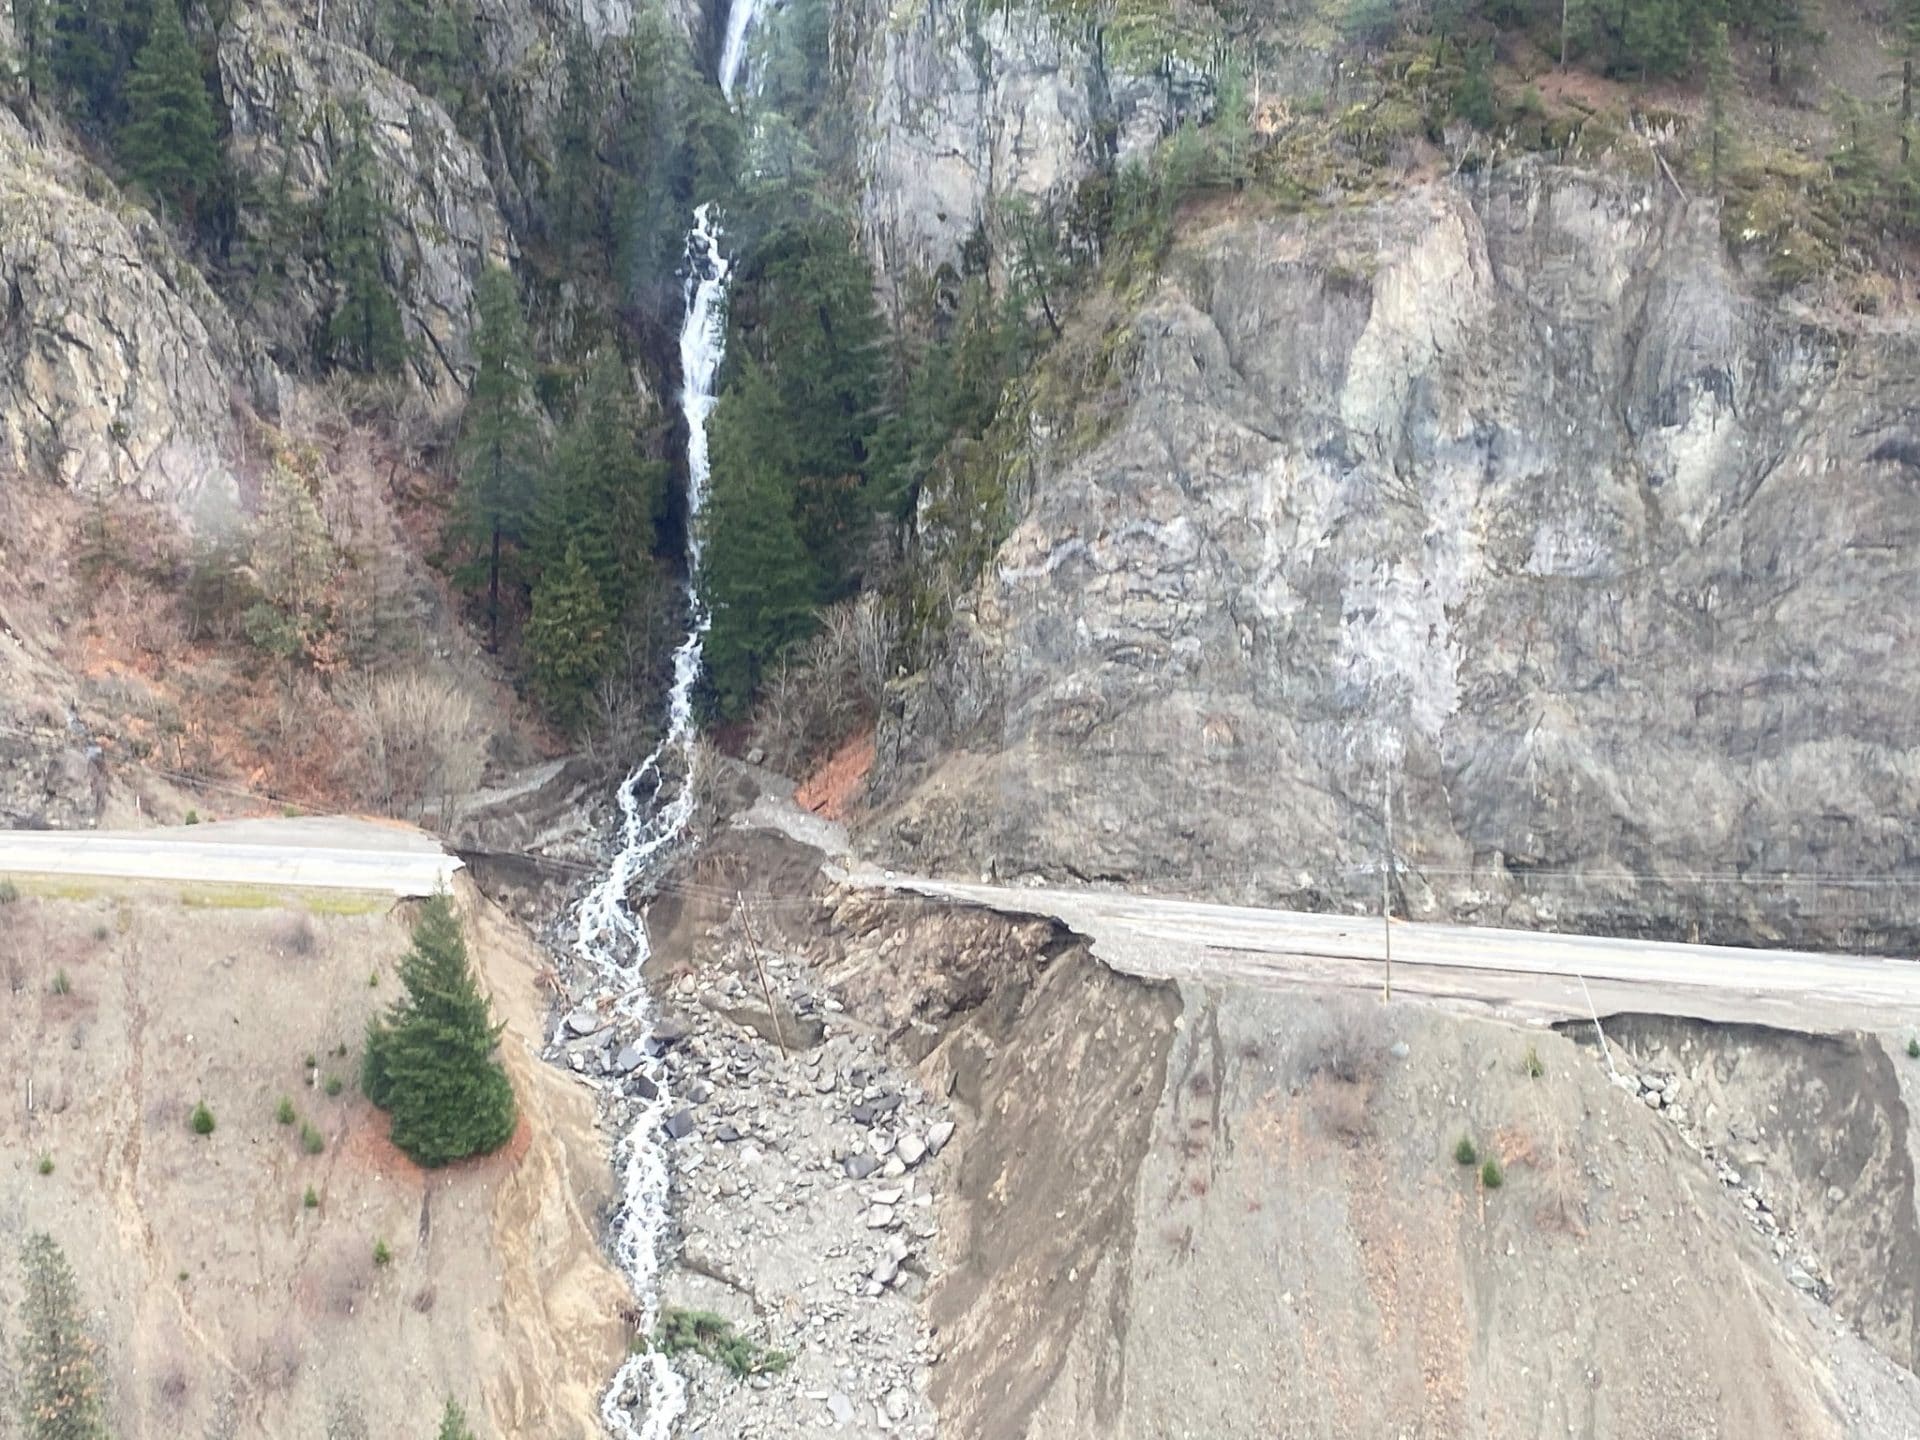 Washed out road; Highway 1 damage at Jackass Mountain.